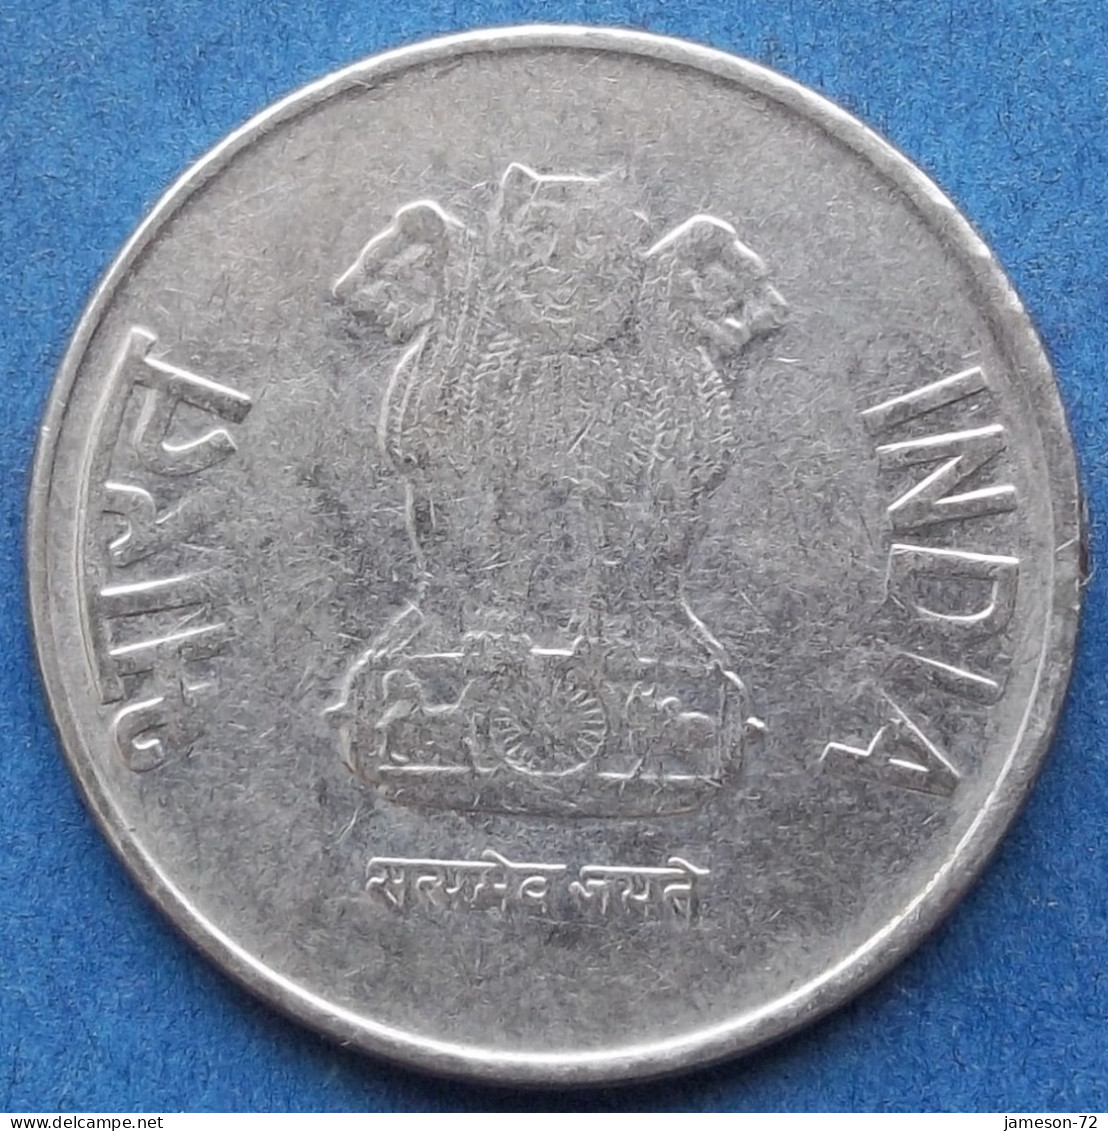 INDIA - 2 Rupees 2012 "Lotus Flowers" KM# 395 Republic Decimal Coinage (1957) - Edelweiss Coins - Georgia